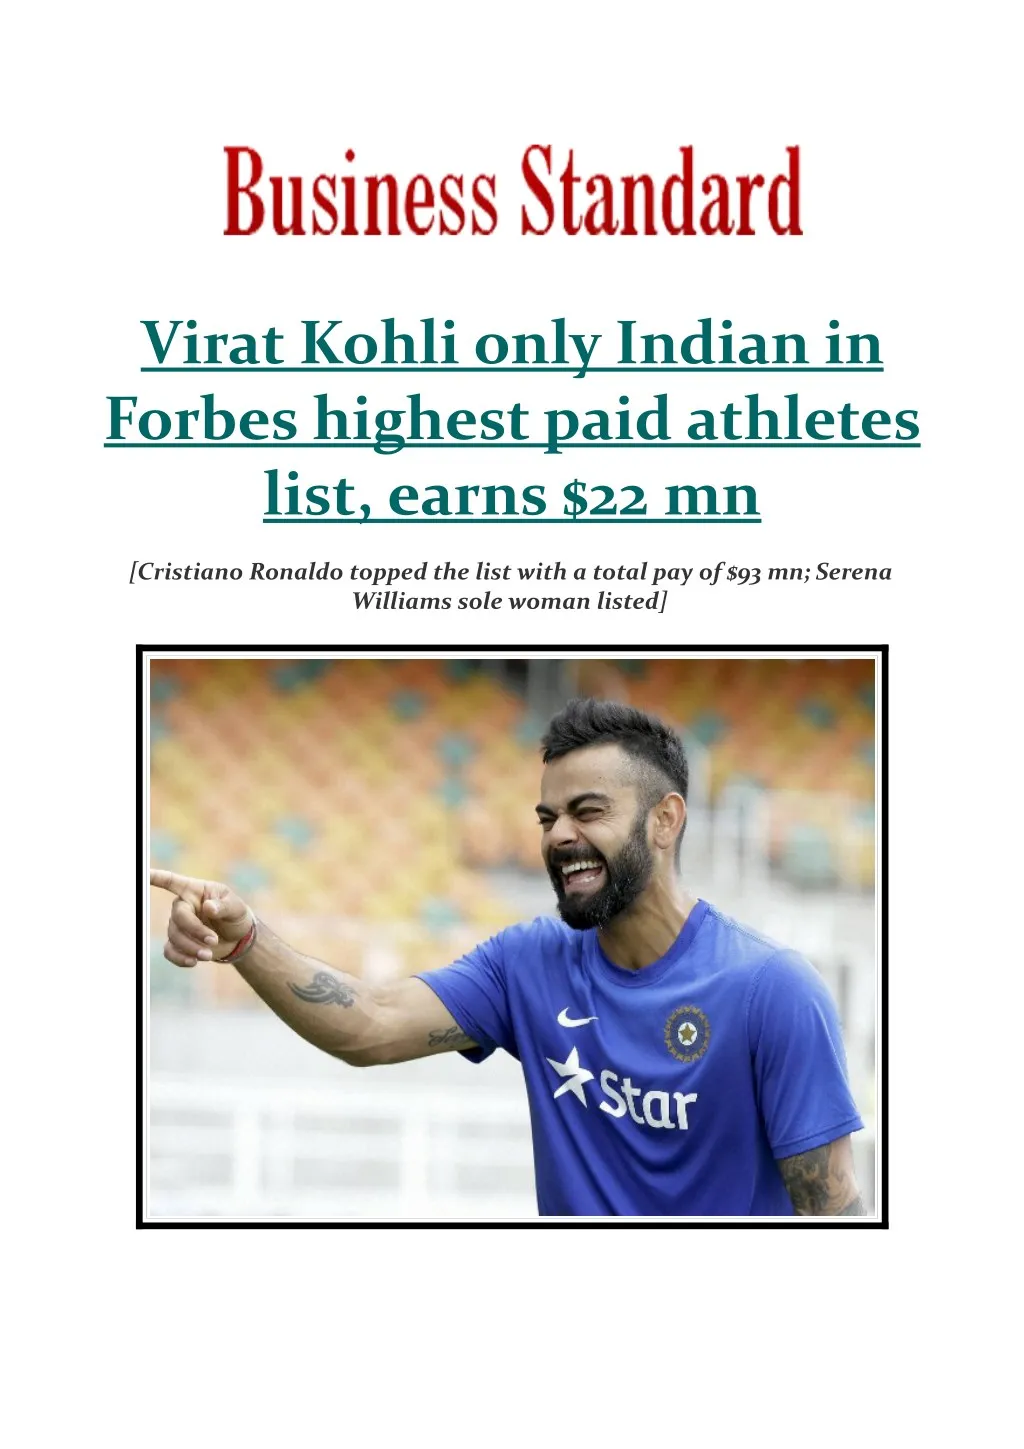 virat kohli only indian in forbes highest paid